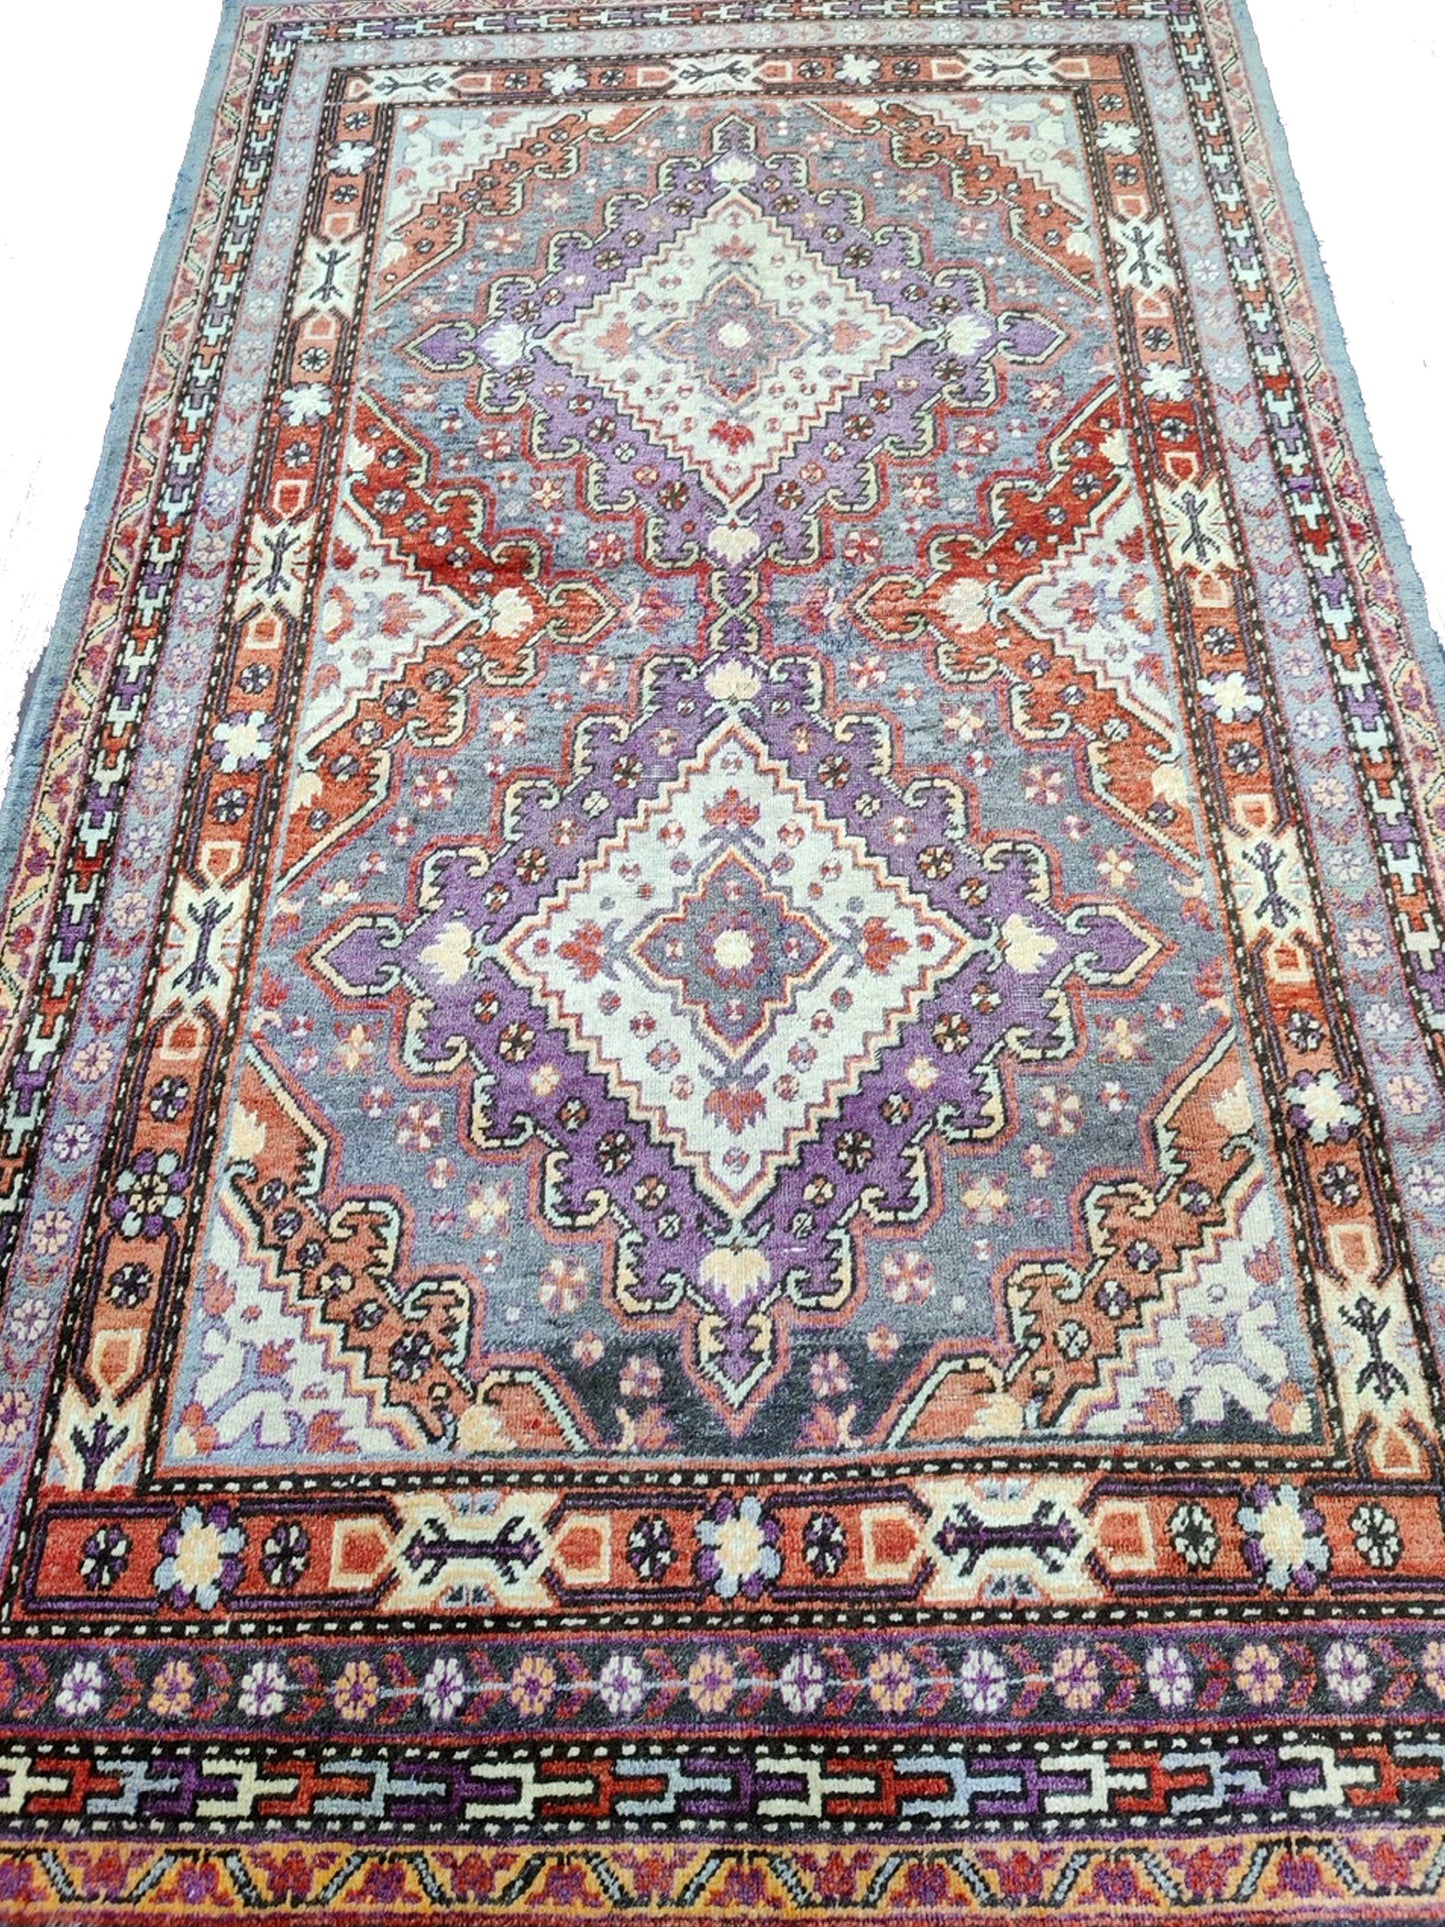 Get trendy with Rust Grey Antique Khotan Handknotted Rug 5.6x9.2ft 166x278cms - Tribal Rugs available at Jaipur Oriental Rugs. Grab yours for $5045.00 today!